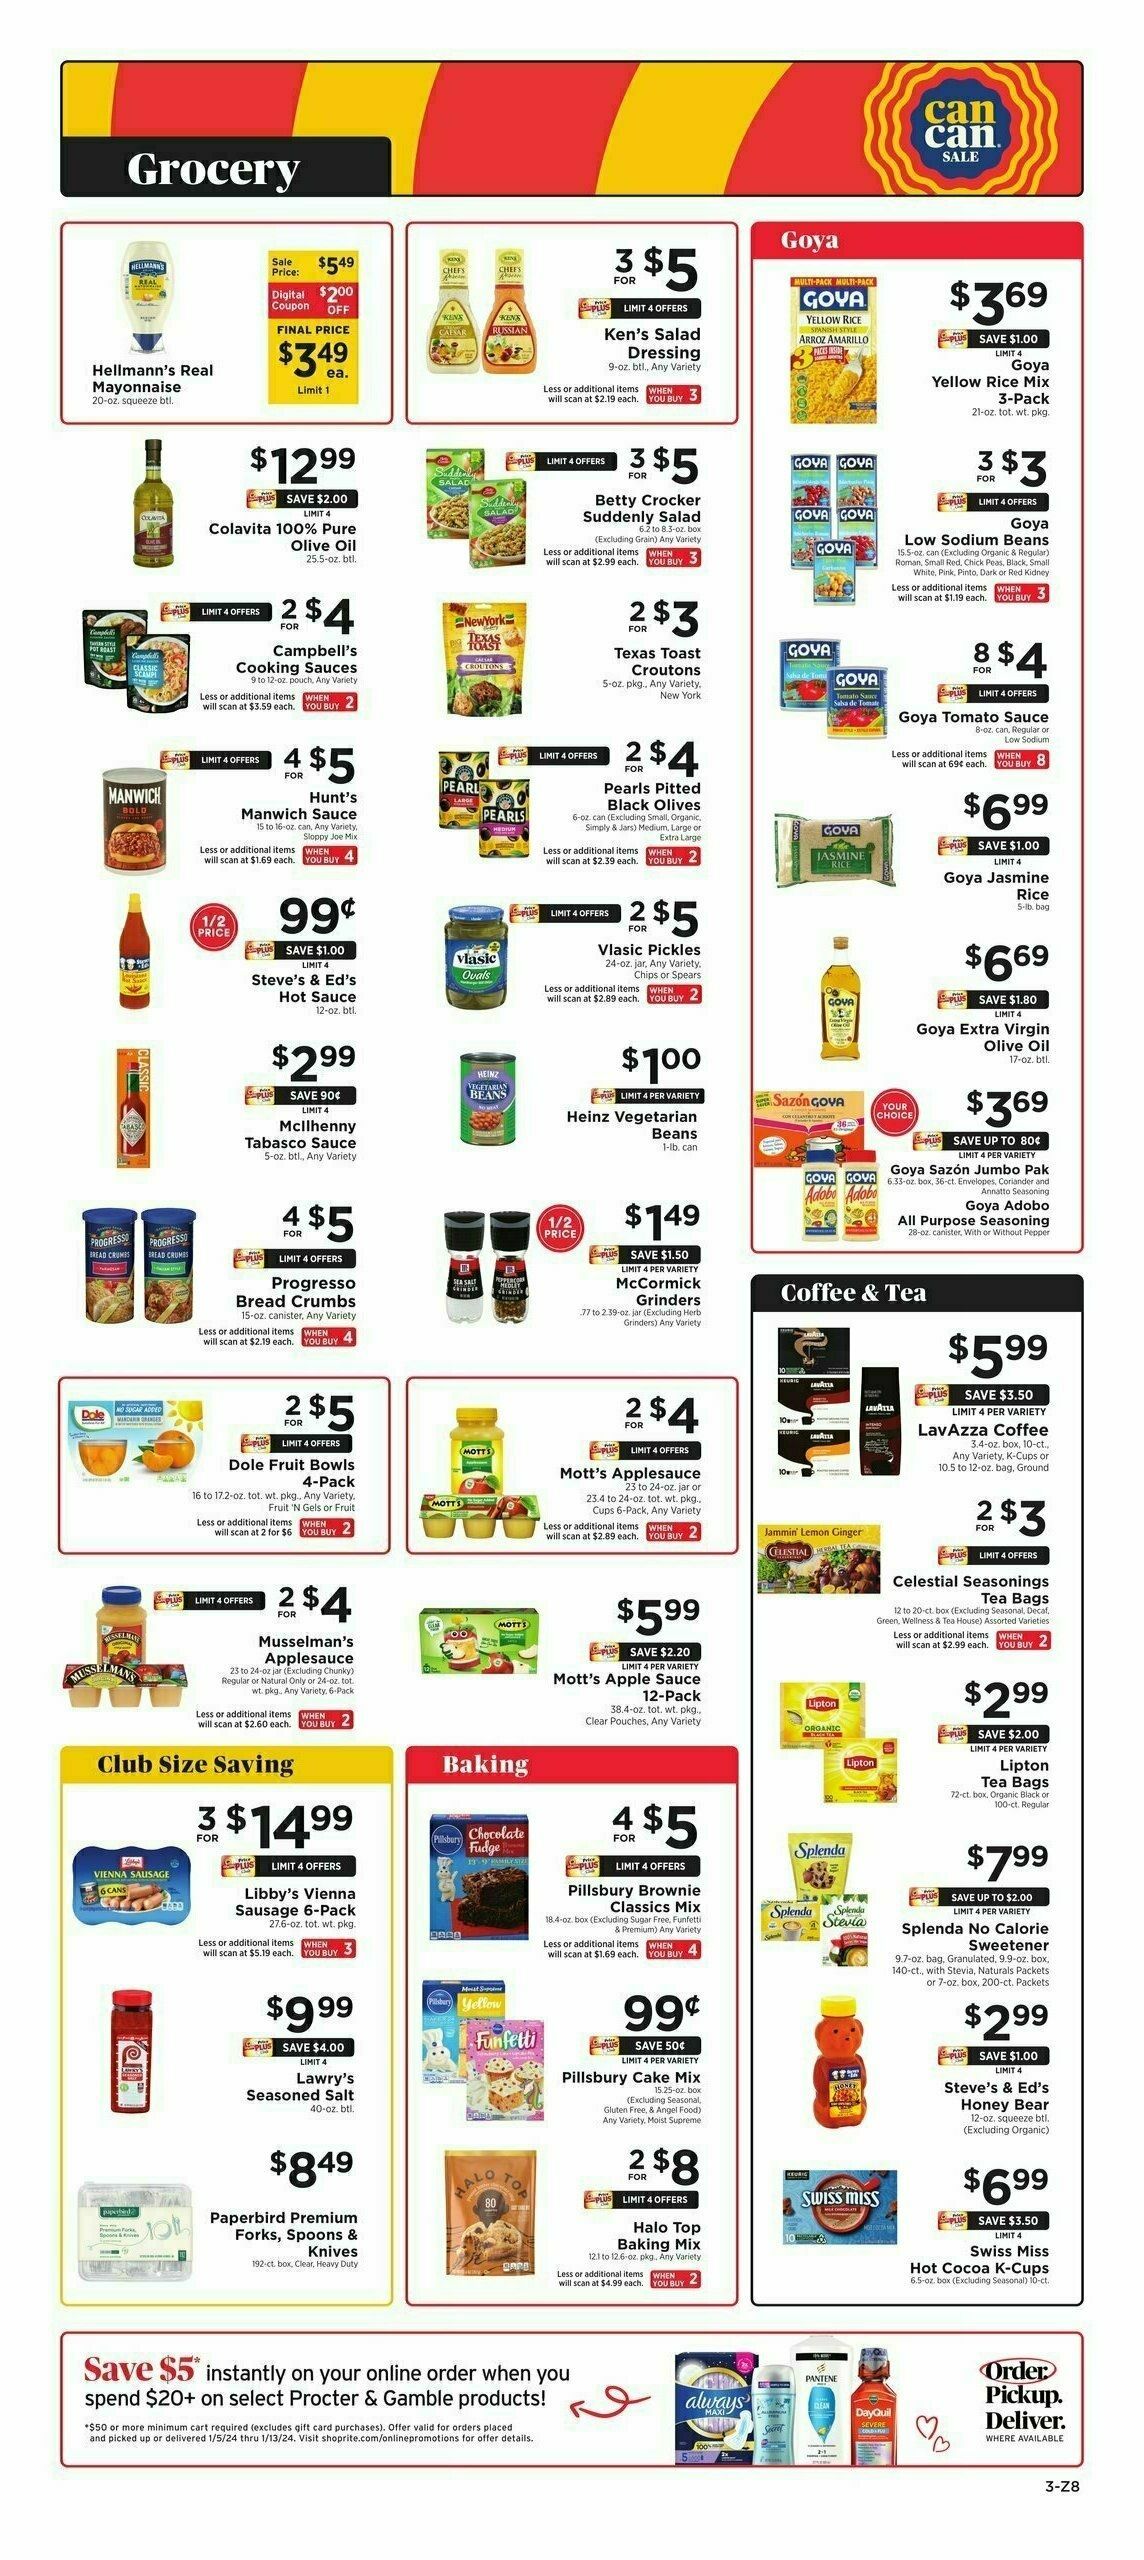 ShopRite Weekly Ad from January 5